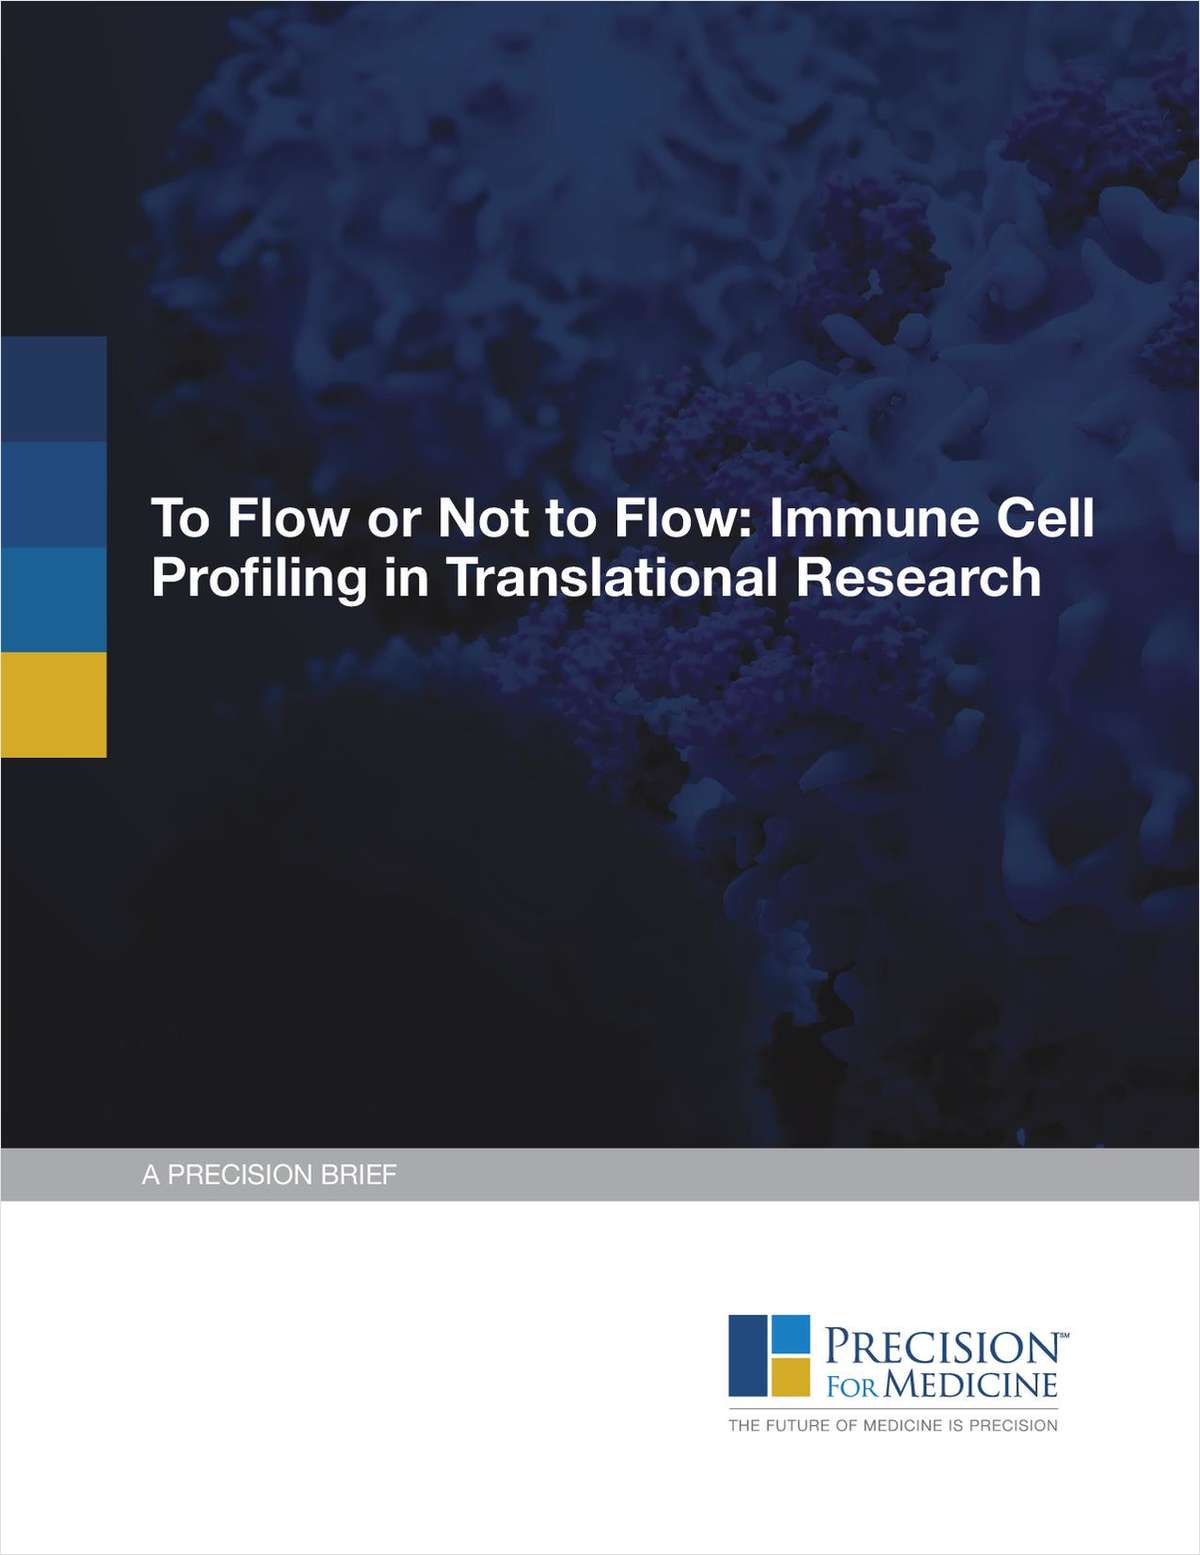 To Flow or Not Flow: Immunophenotyping Choices Simplified in New Guide